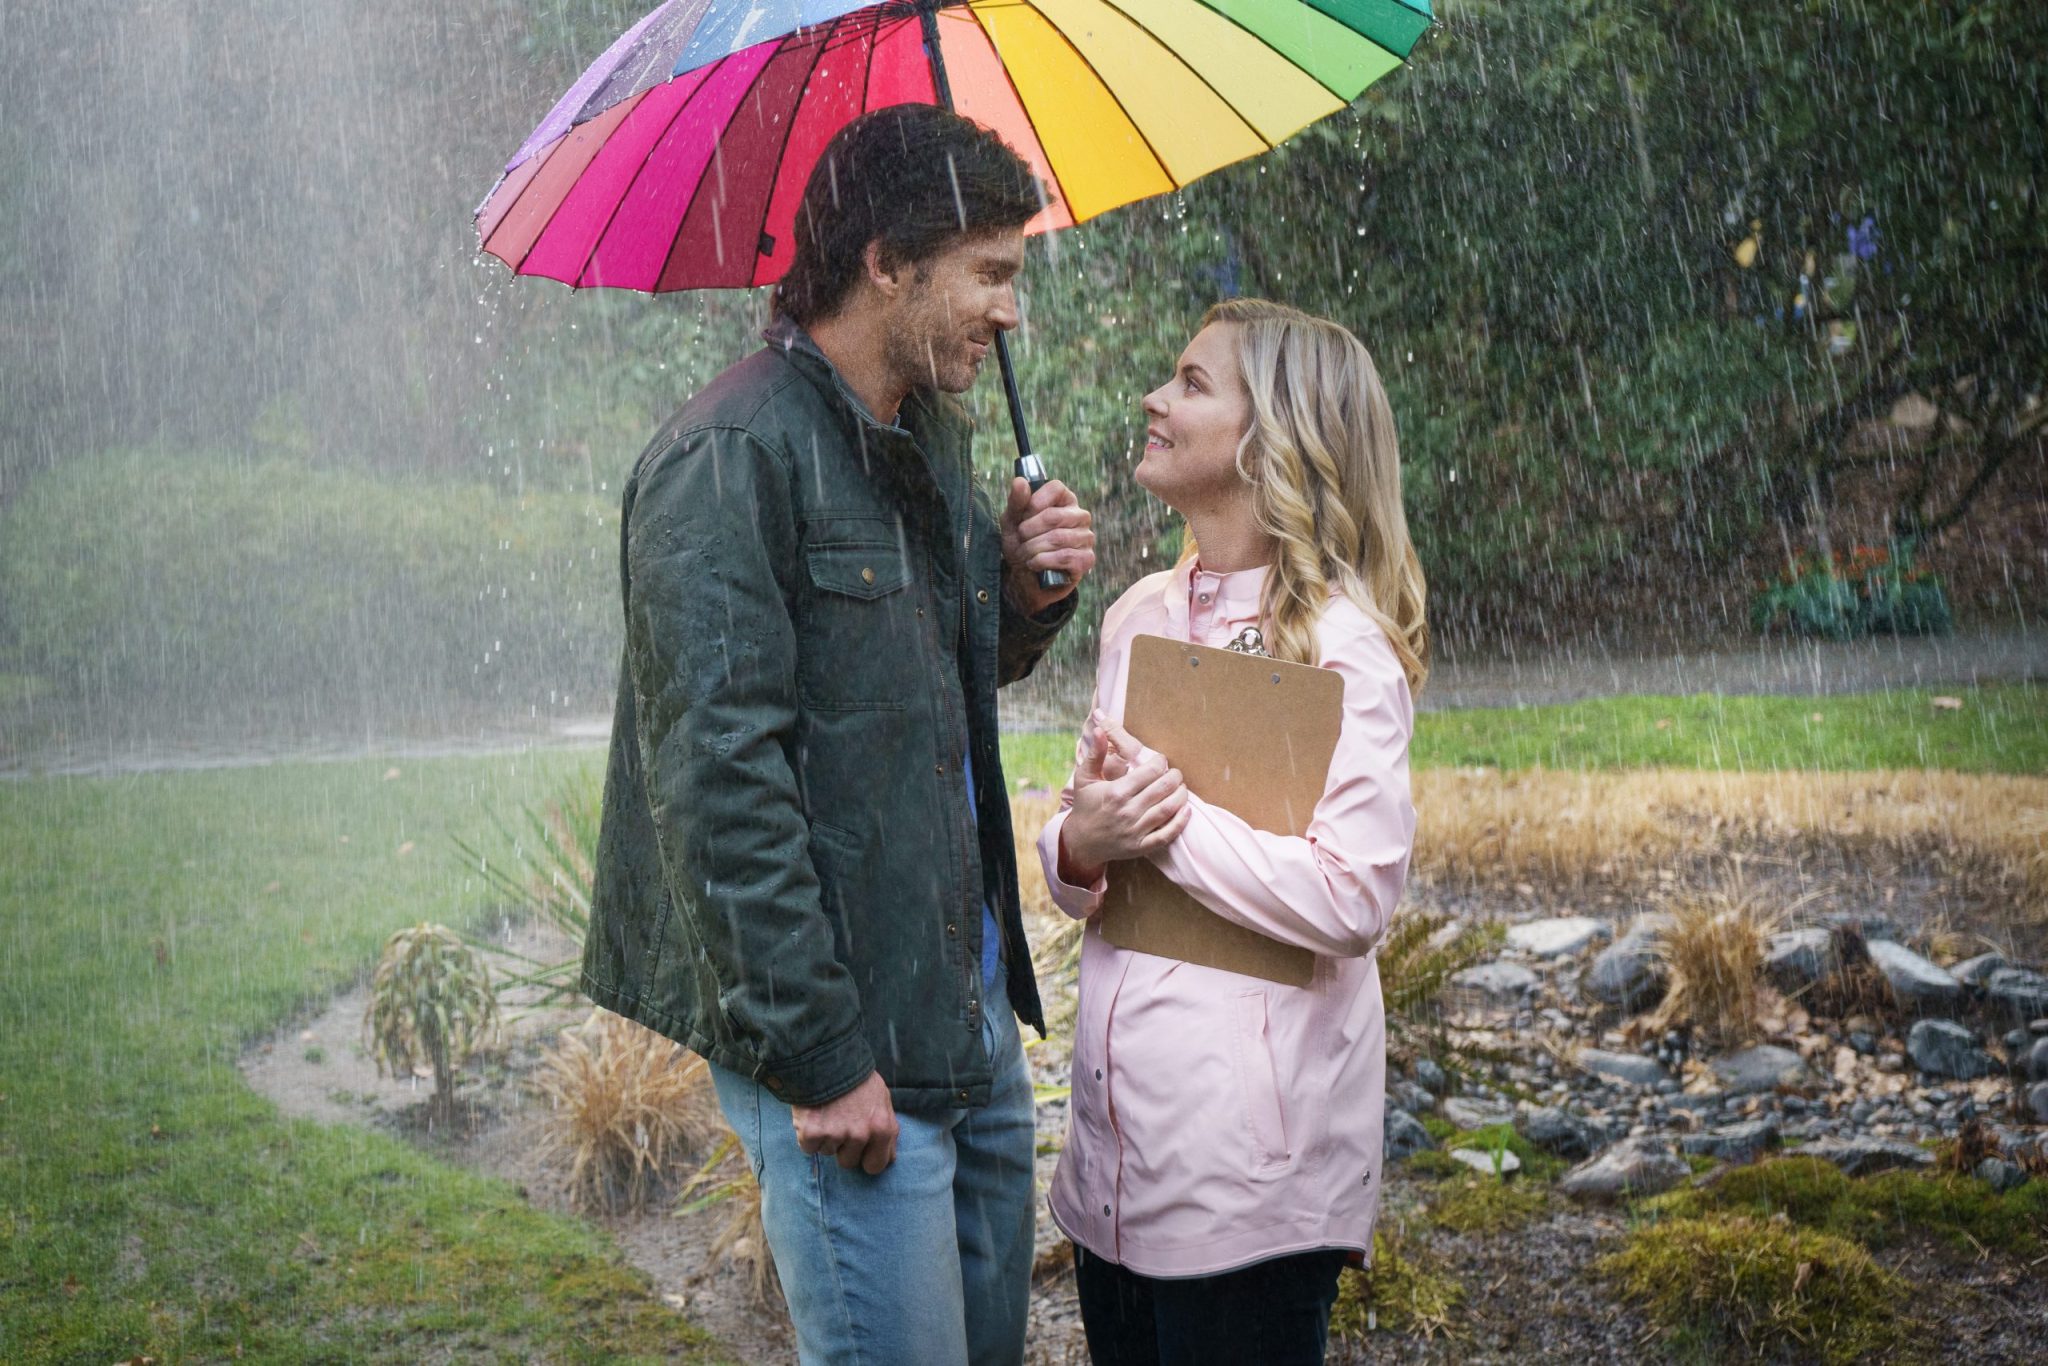 Hallmark, A Little Romance, On-air weather reporter Leah Waddell is getting weary of her bleak dating life and inability to be taken seriously as a budding meteorologist. At her wits end, she makes the decision to stay single and focus on her career for a full year. As soon as she makes this commitment, it literally starts pouring rain and men. As Leah deflects multiple romantic offers, she befriends her new neighbor Mark, a handsome dairy farmer who teaches her methods to predict the weather by observing signs in nature. Photo: Christopher Russell, Cindy Busby Credit: ©2020 Crown Media United States LLC/Photographer: Courtesy of Luba Popovic/Johnson Productions